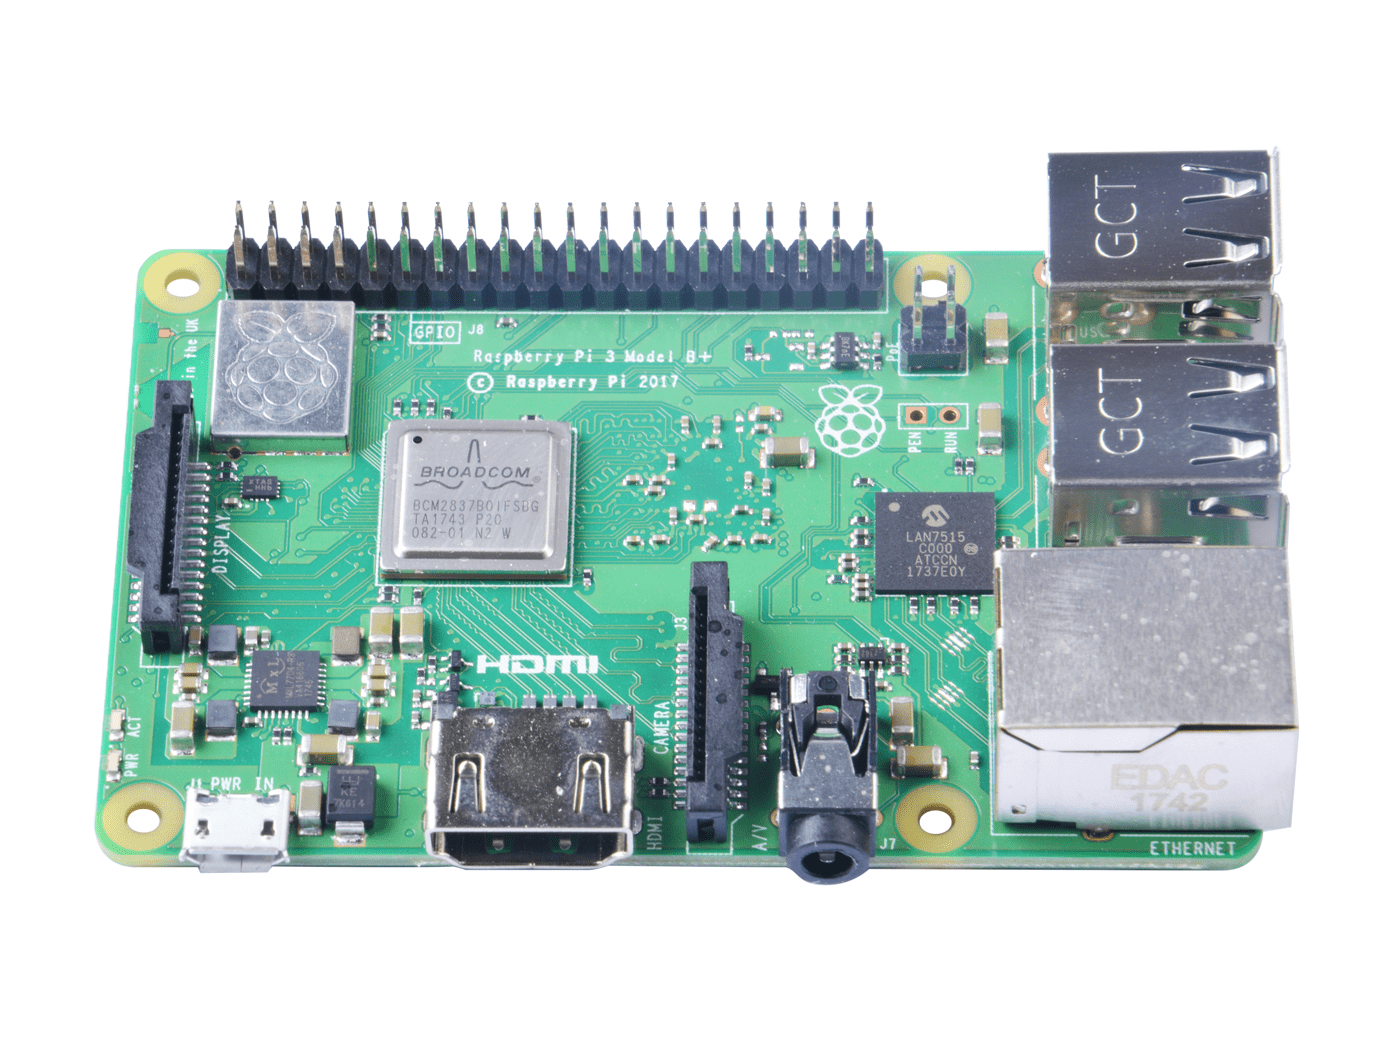 Raspberry Pi 3 Model B + Review Front